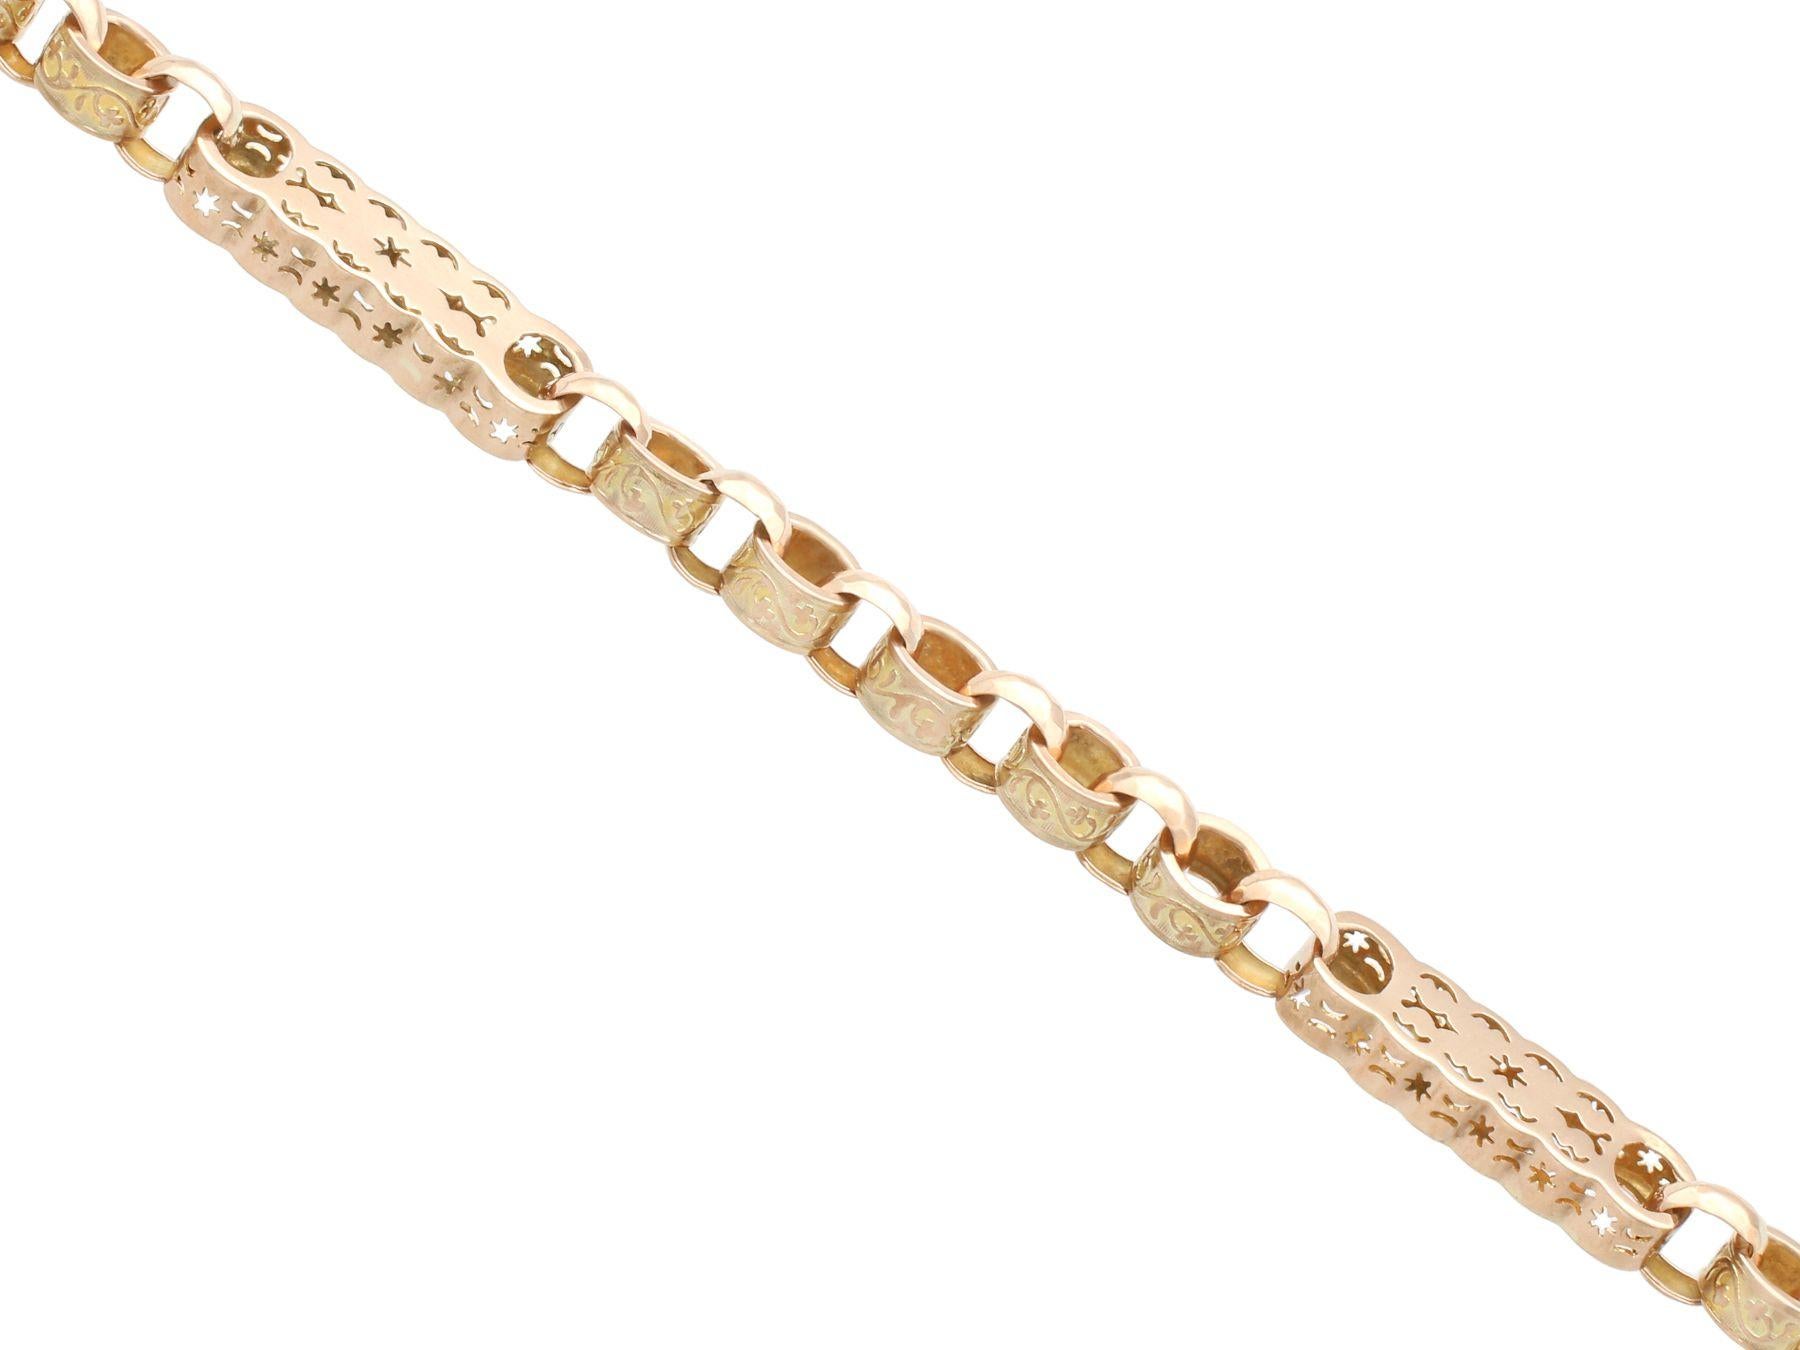 Antique 9 Carat Yellow Gold Watch Chain In Excellent Condition For Sale In Jesmond, Newcastle Upon Tyne